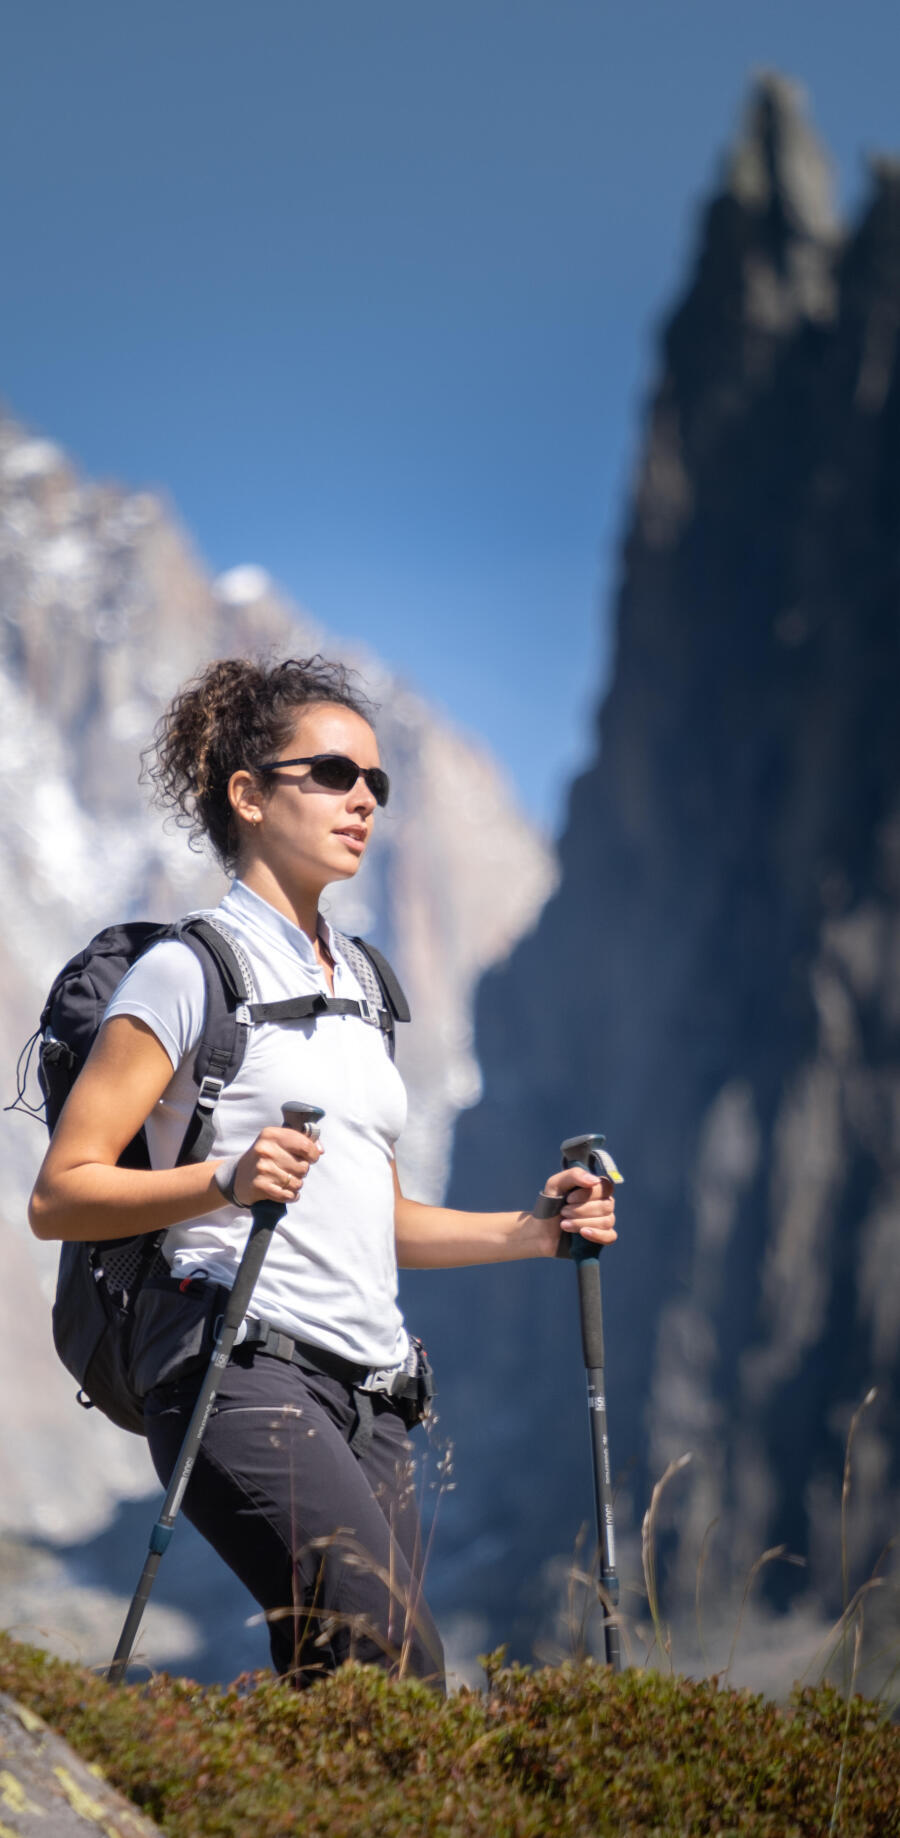 What Your Customers Want When Looking for Hiking Sunglasses